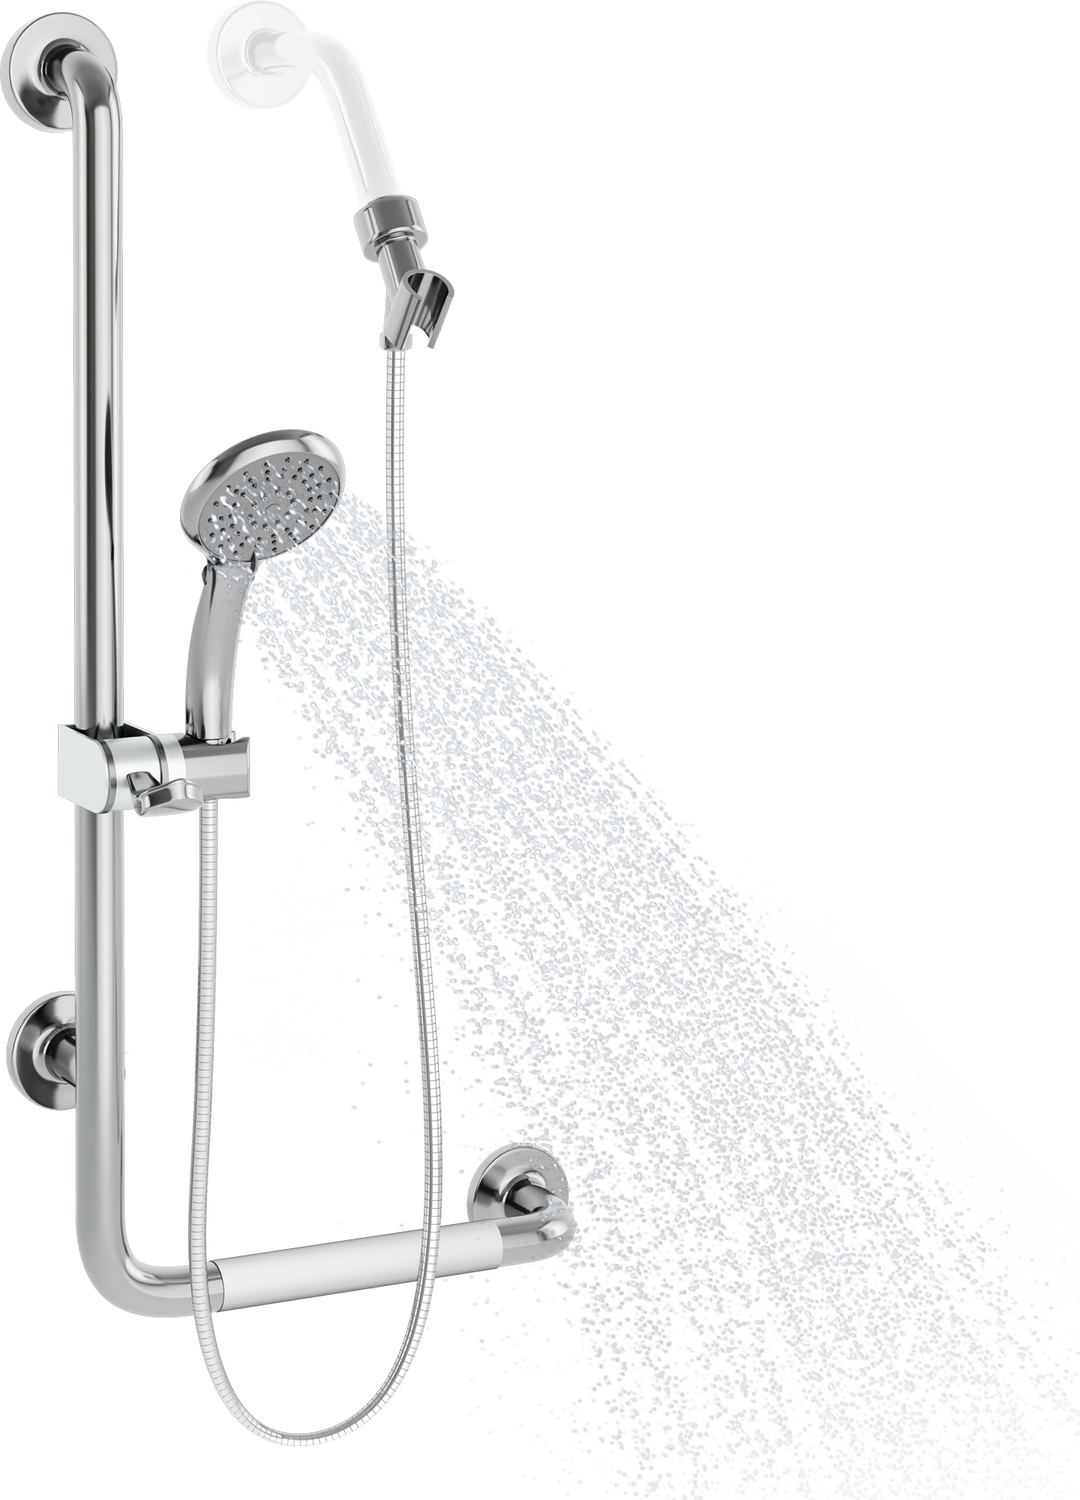 handheld shower head wall mount Pulse Polished Stainless Steel - Chrome